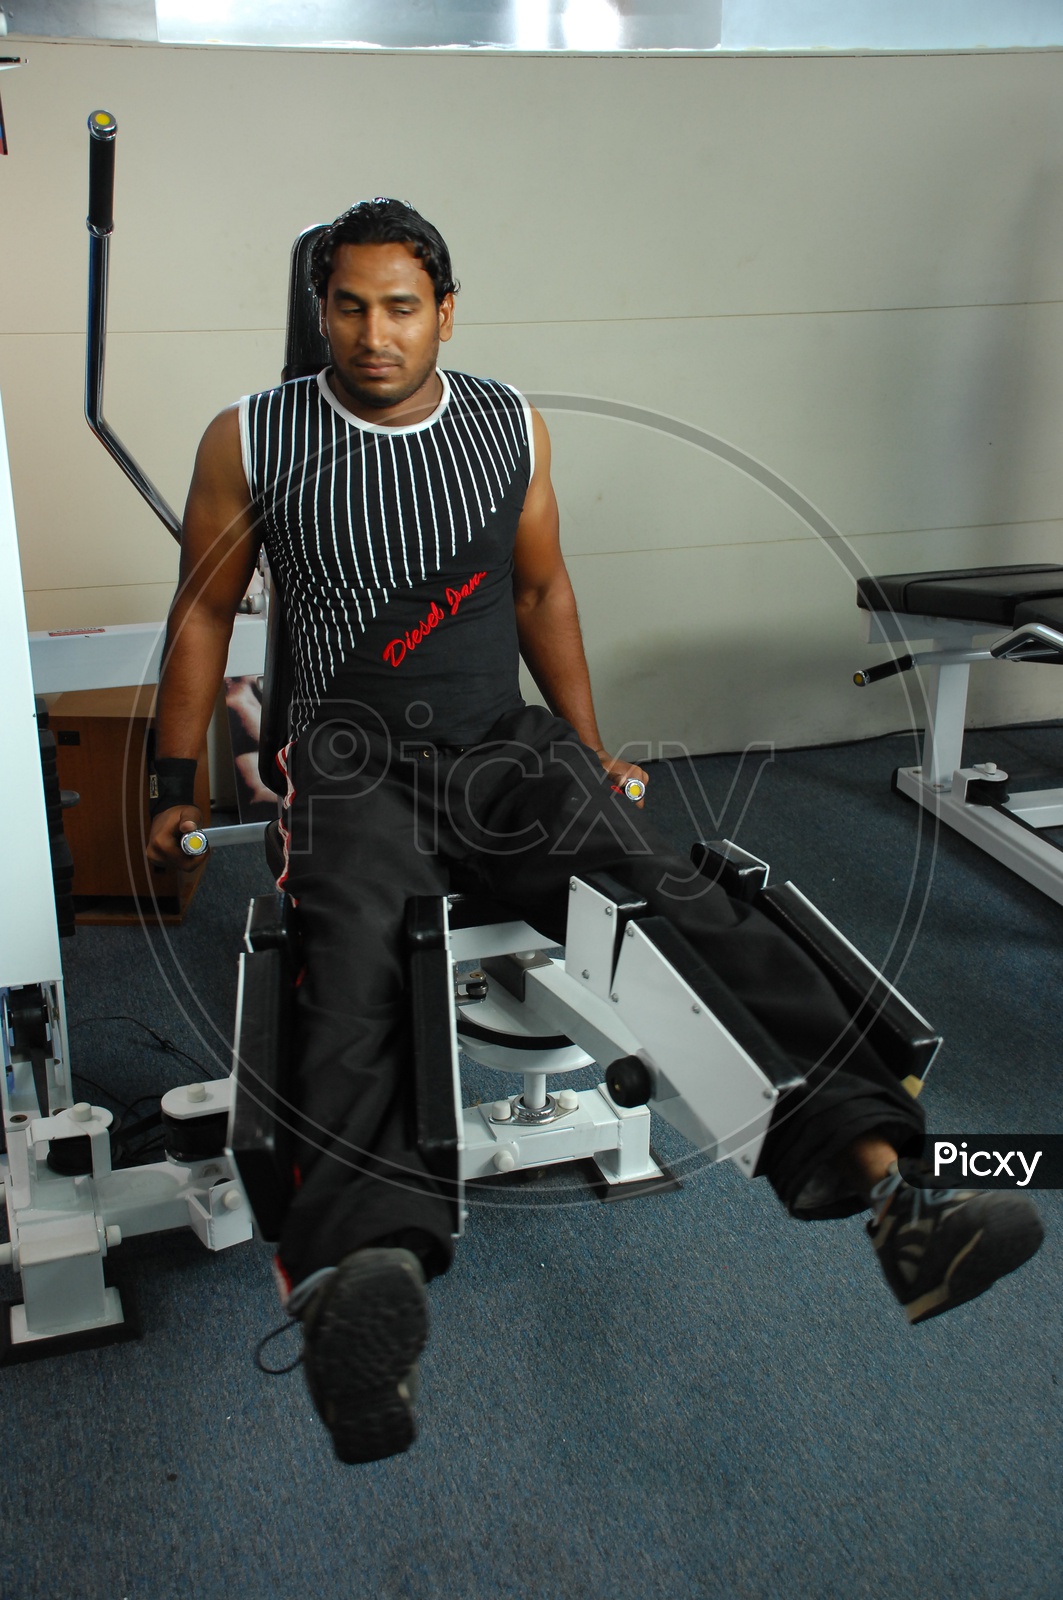 Man doing Leg Adduction / Abduction Machine exercise in a Gym